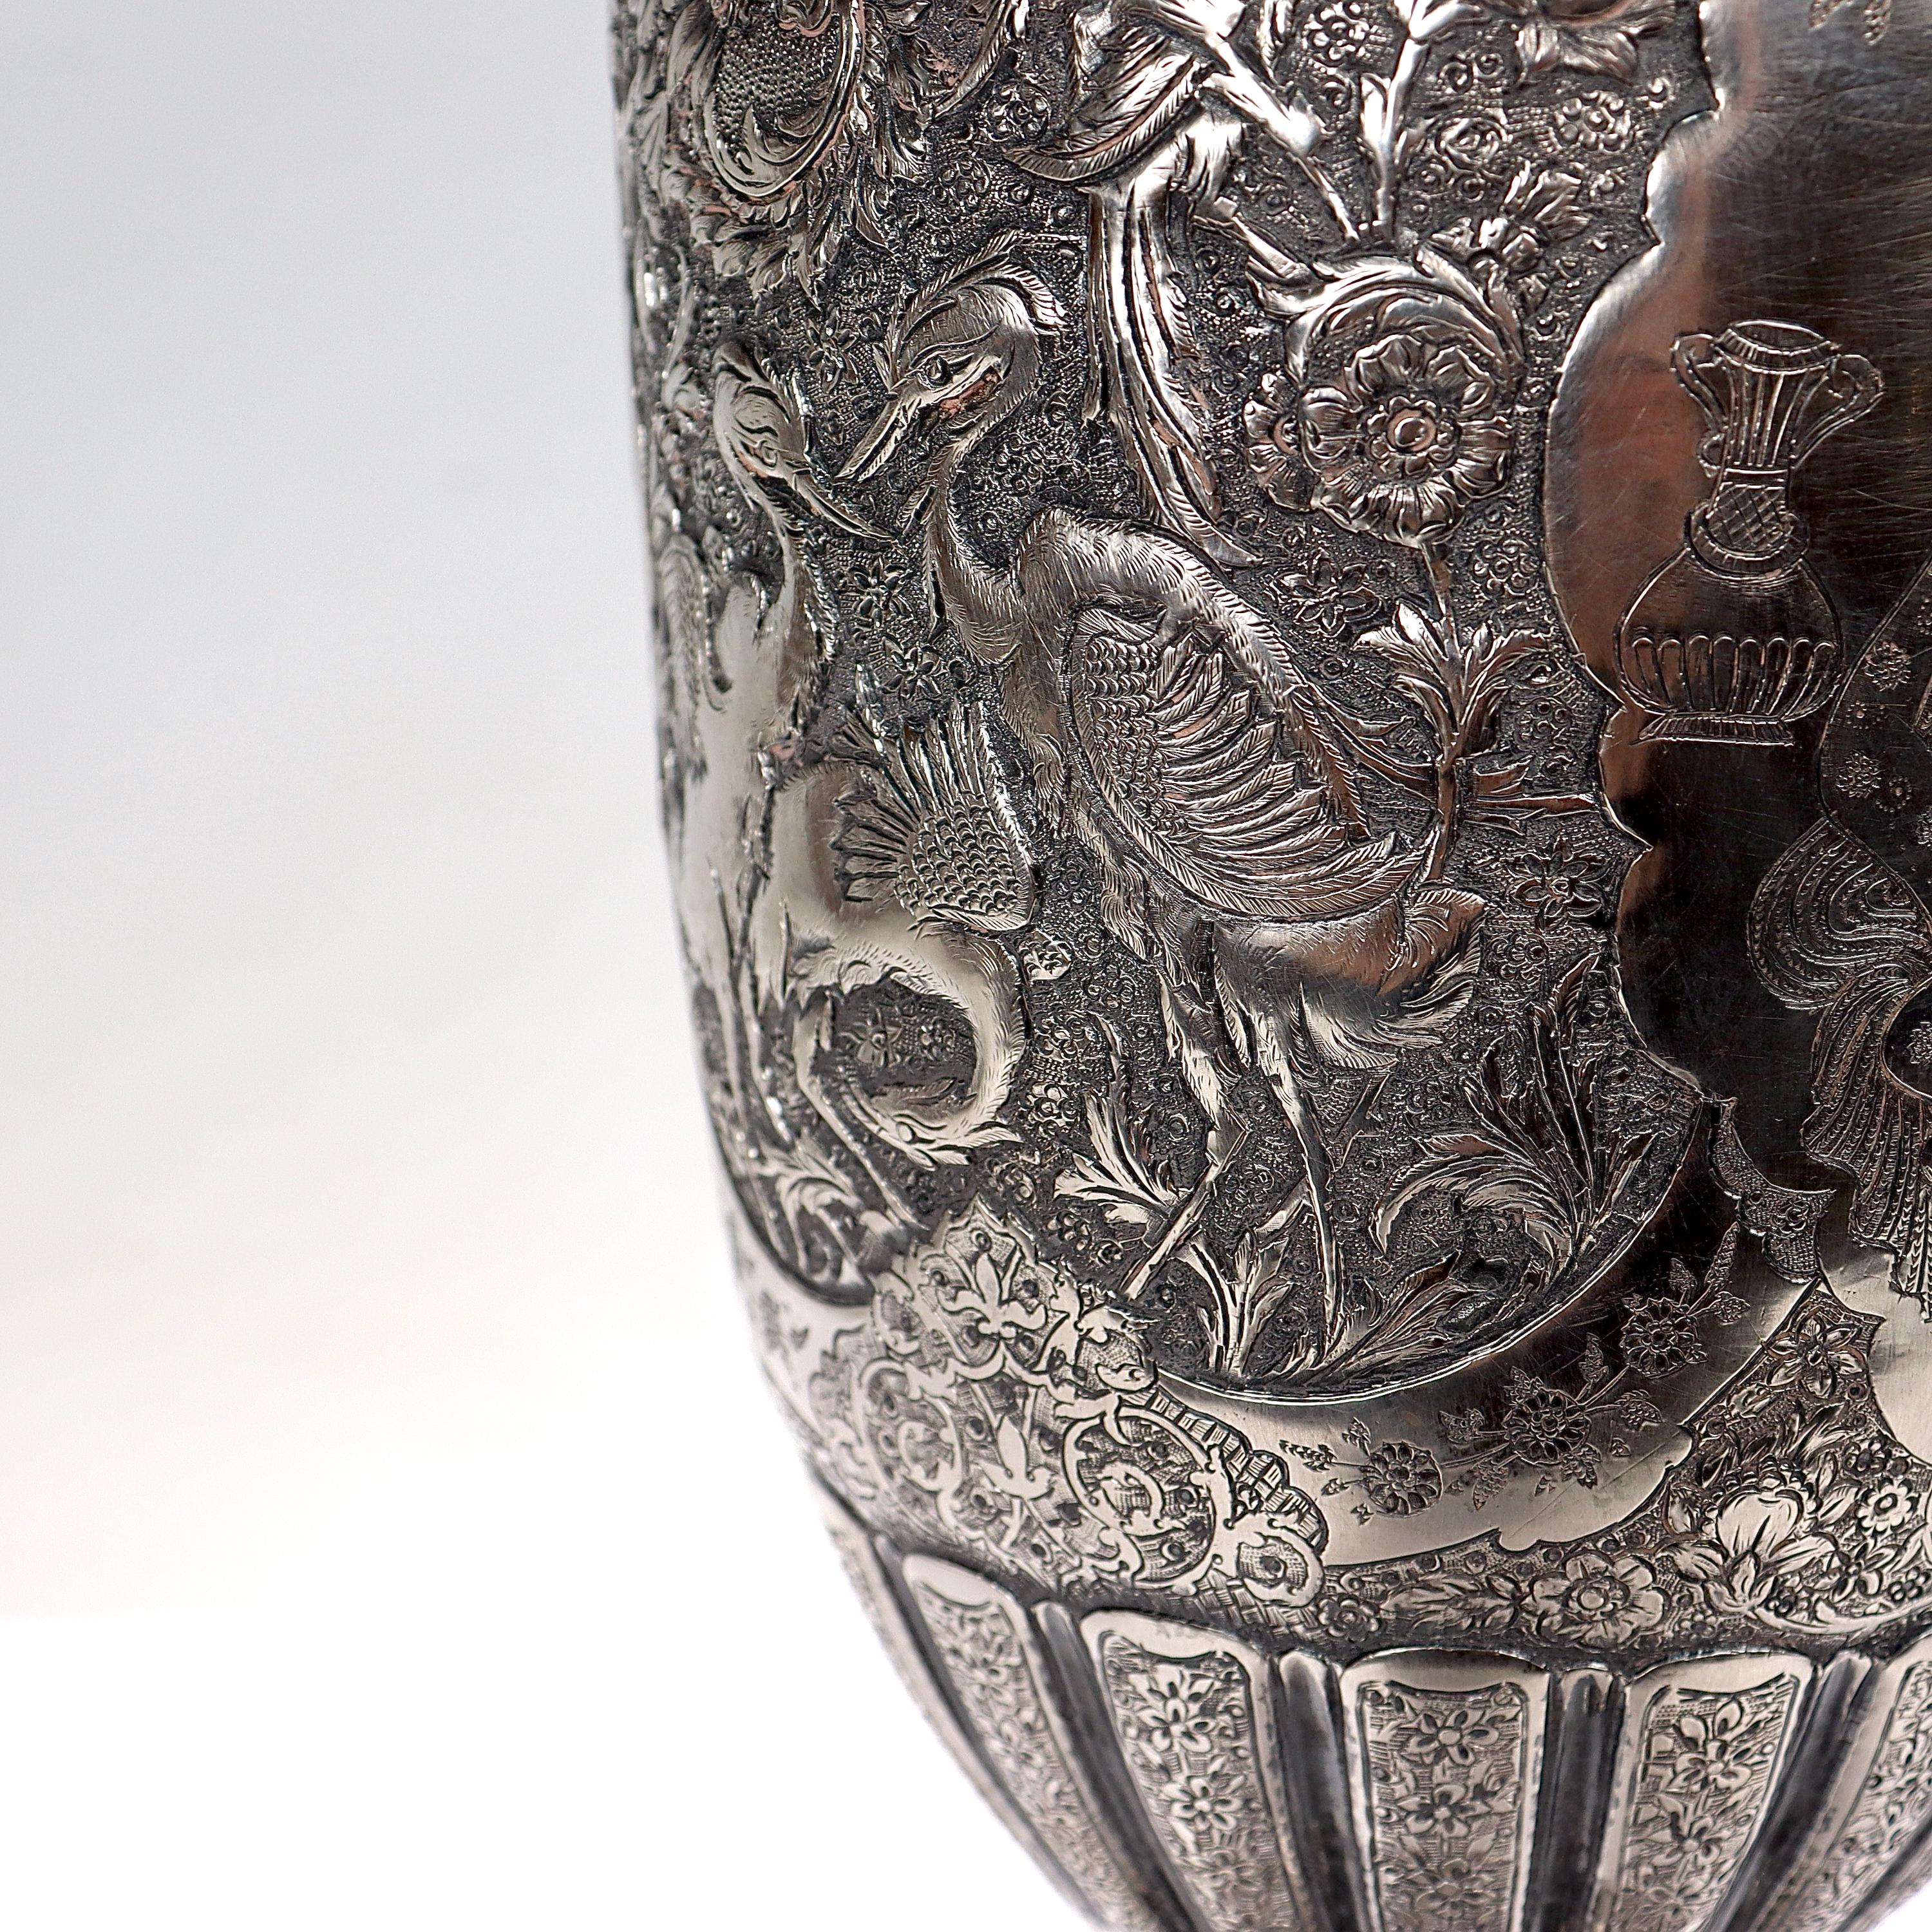 Large Twin-Handled Old or Antique Islamic Ottoman / Persian Repoussé Silver Vase For Sale 3